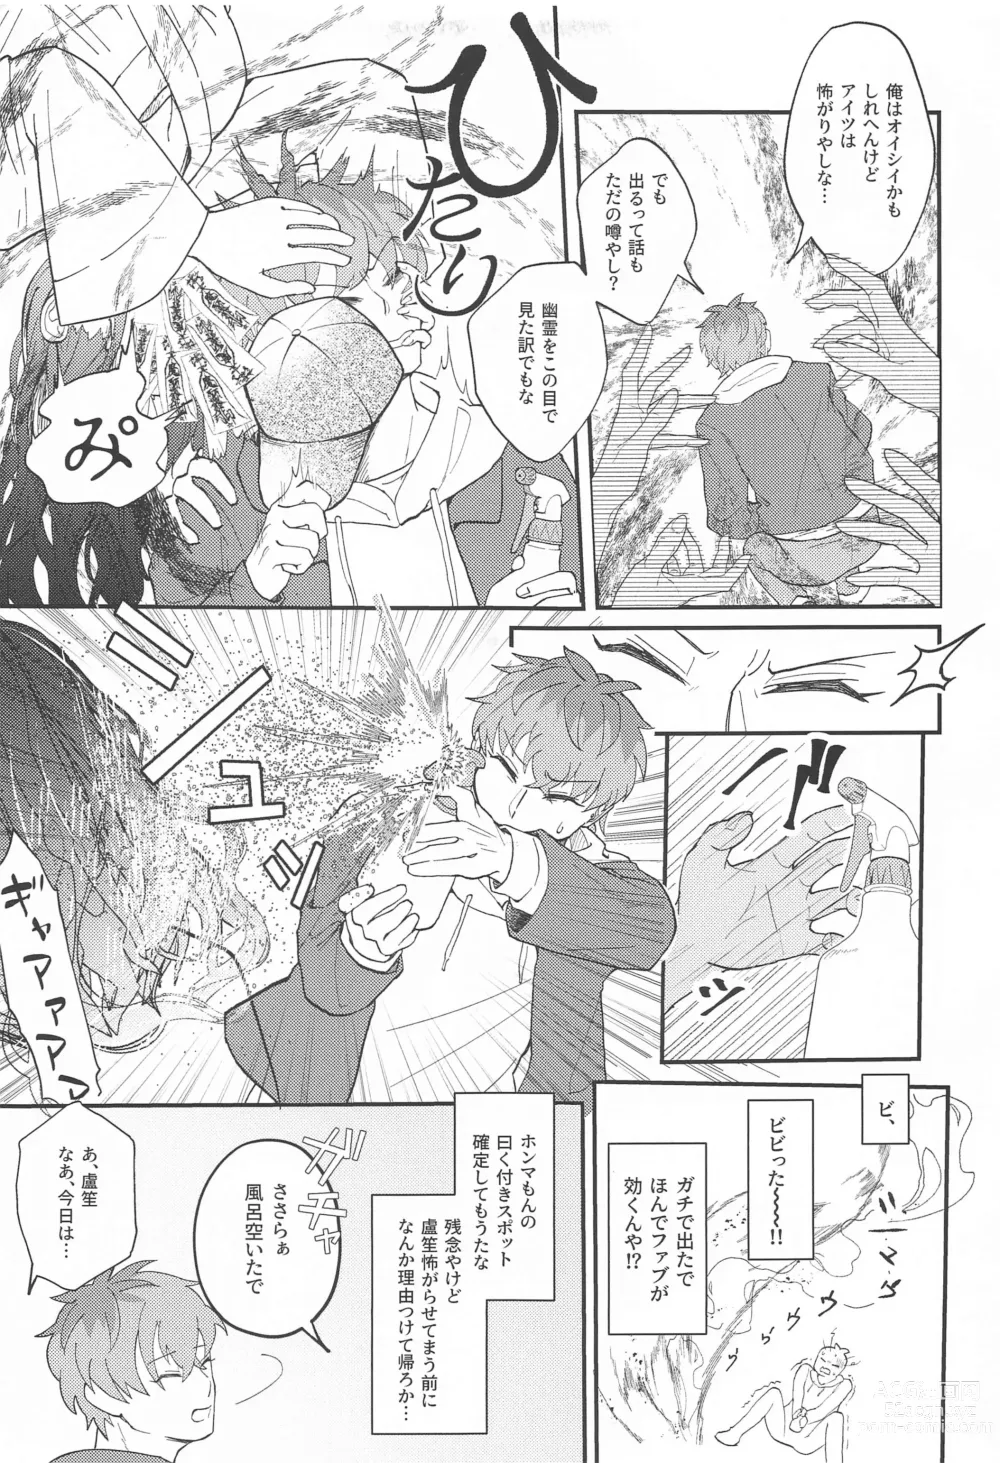 Page 8 of doujinshi Ghost in Love Palace